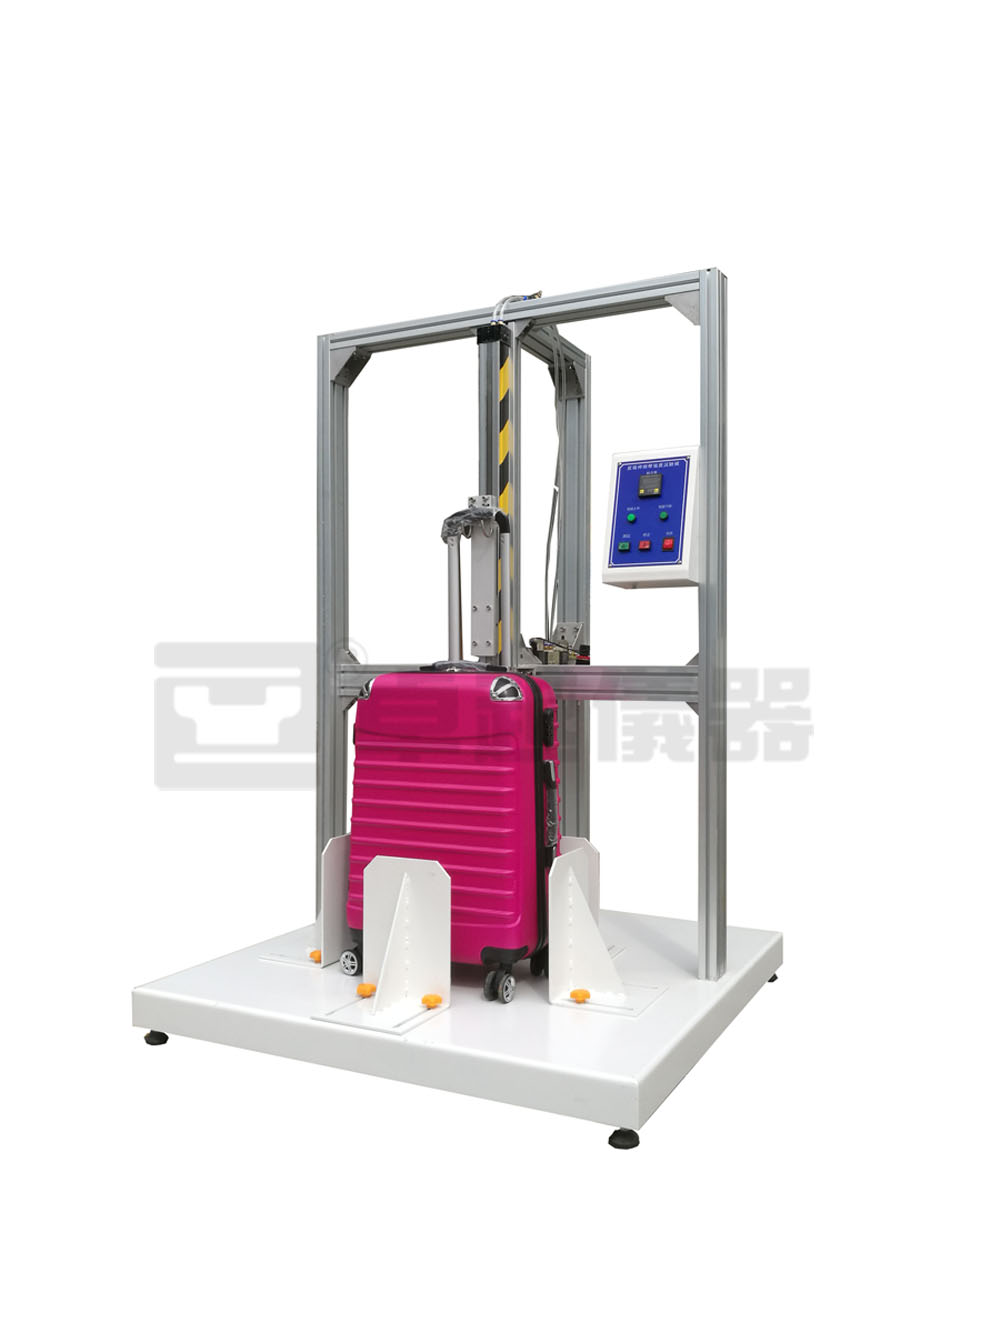 ZY-8104 Case pull rod fatigue tester